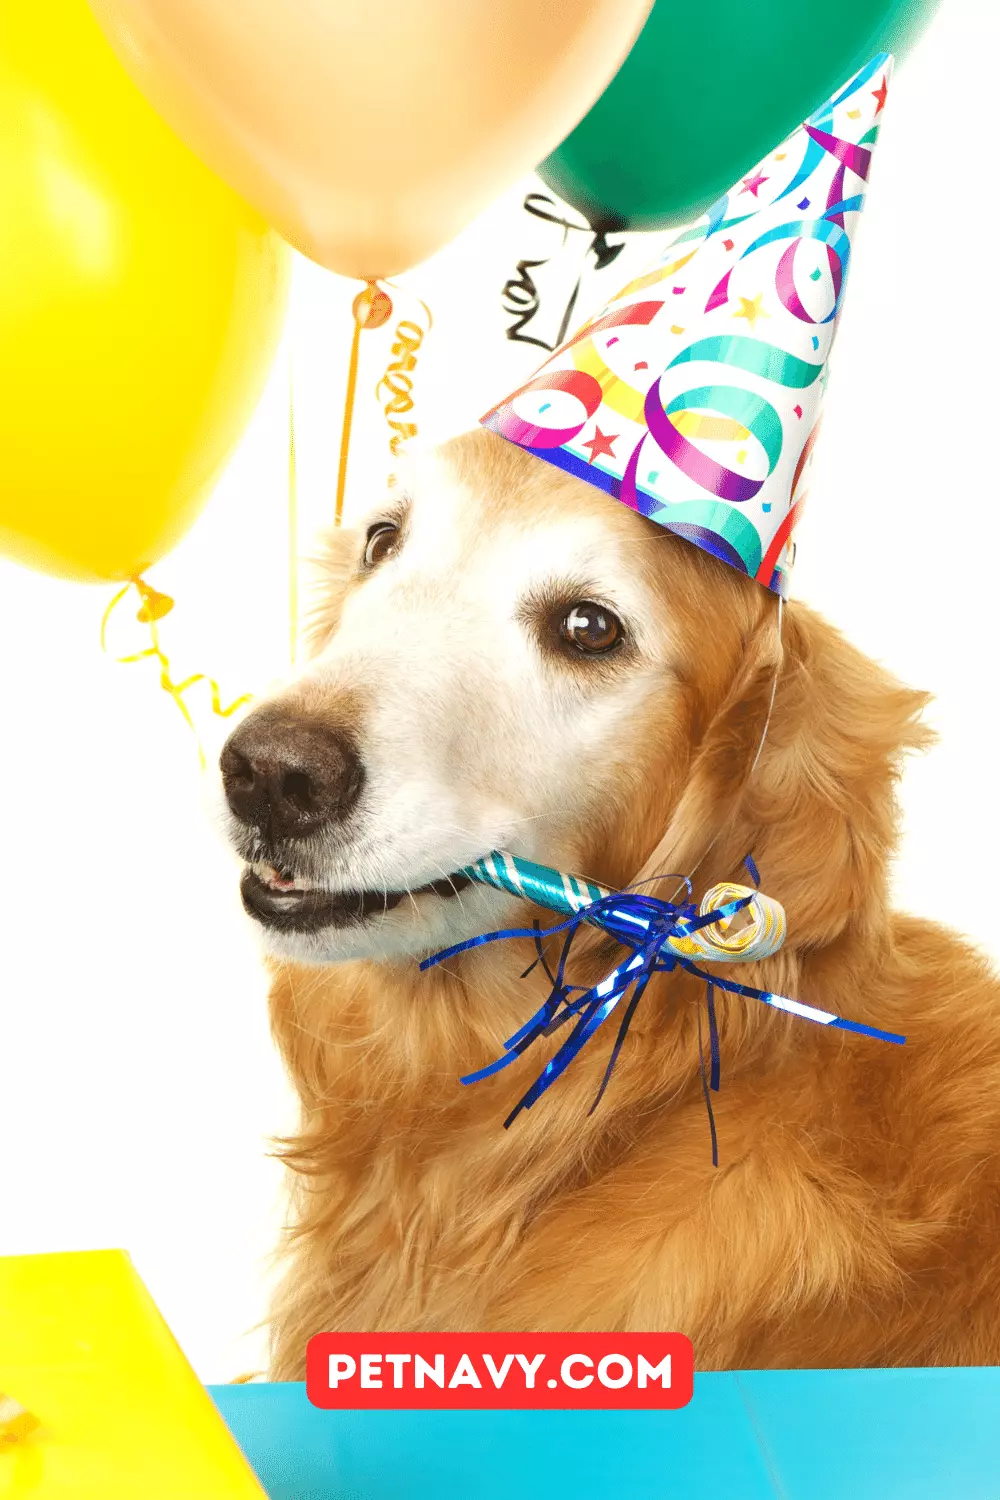 Dog Birthday Fashion: Making Your Pup the Star of the Show